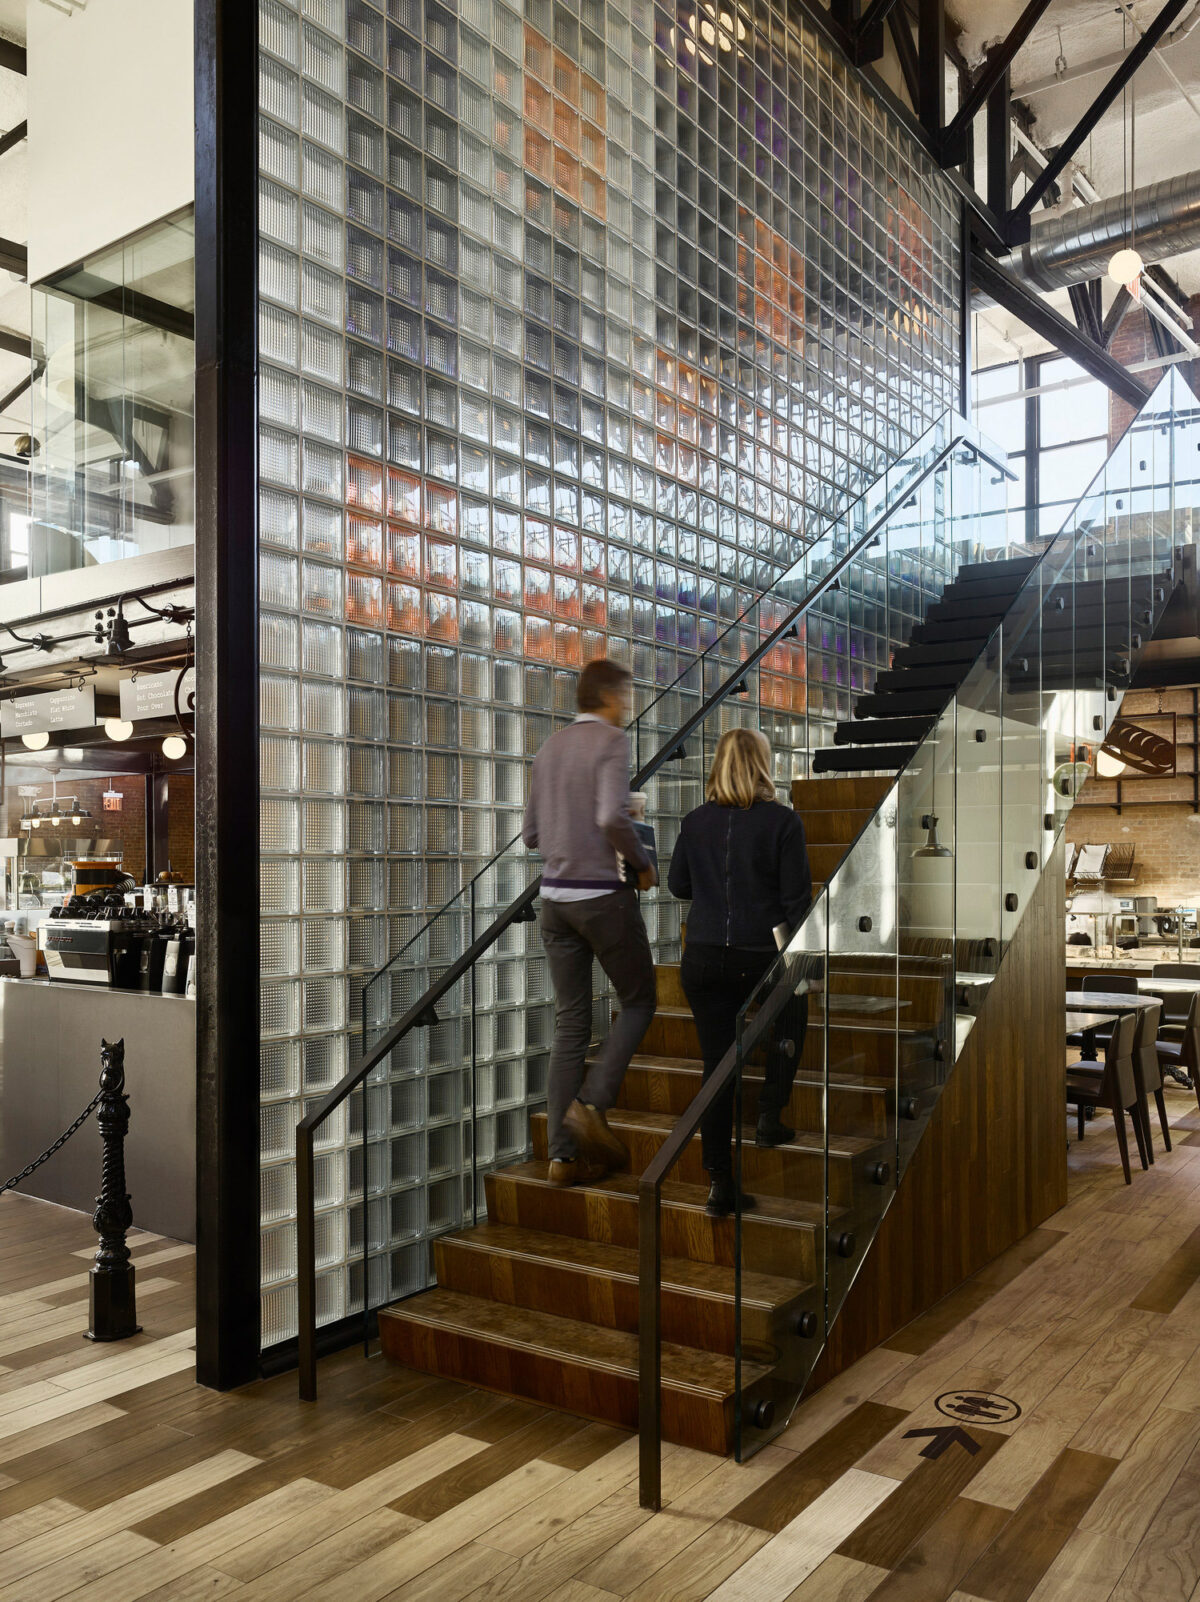 Contemporary restaurant interior featuring a sleek glass block staircase with wooden steps, flanked by a stainless steel and glass balustrade. Industrial design elements like exposed beams add character to the space while patrons ascend the stairs, engaging with the architectural flow.